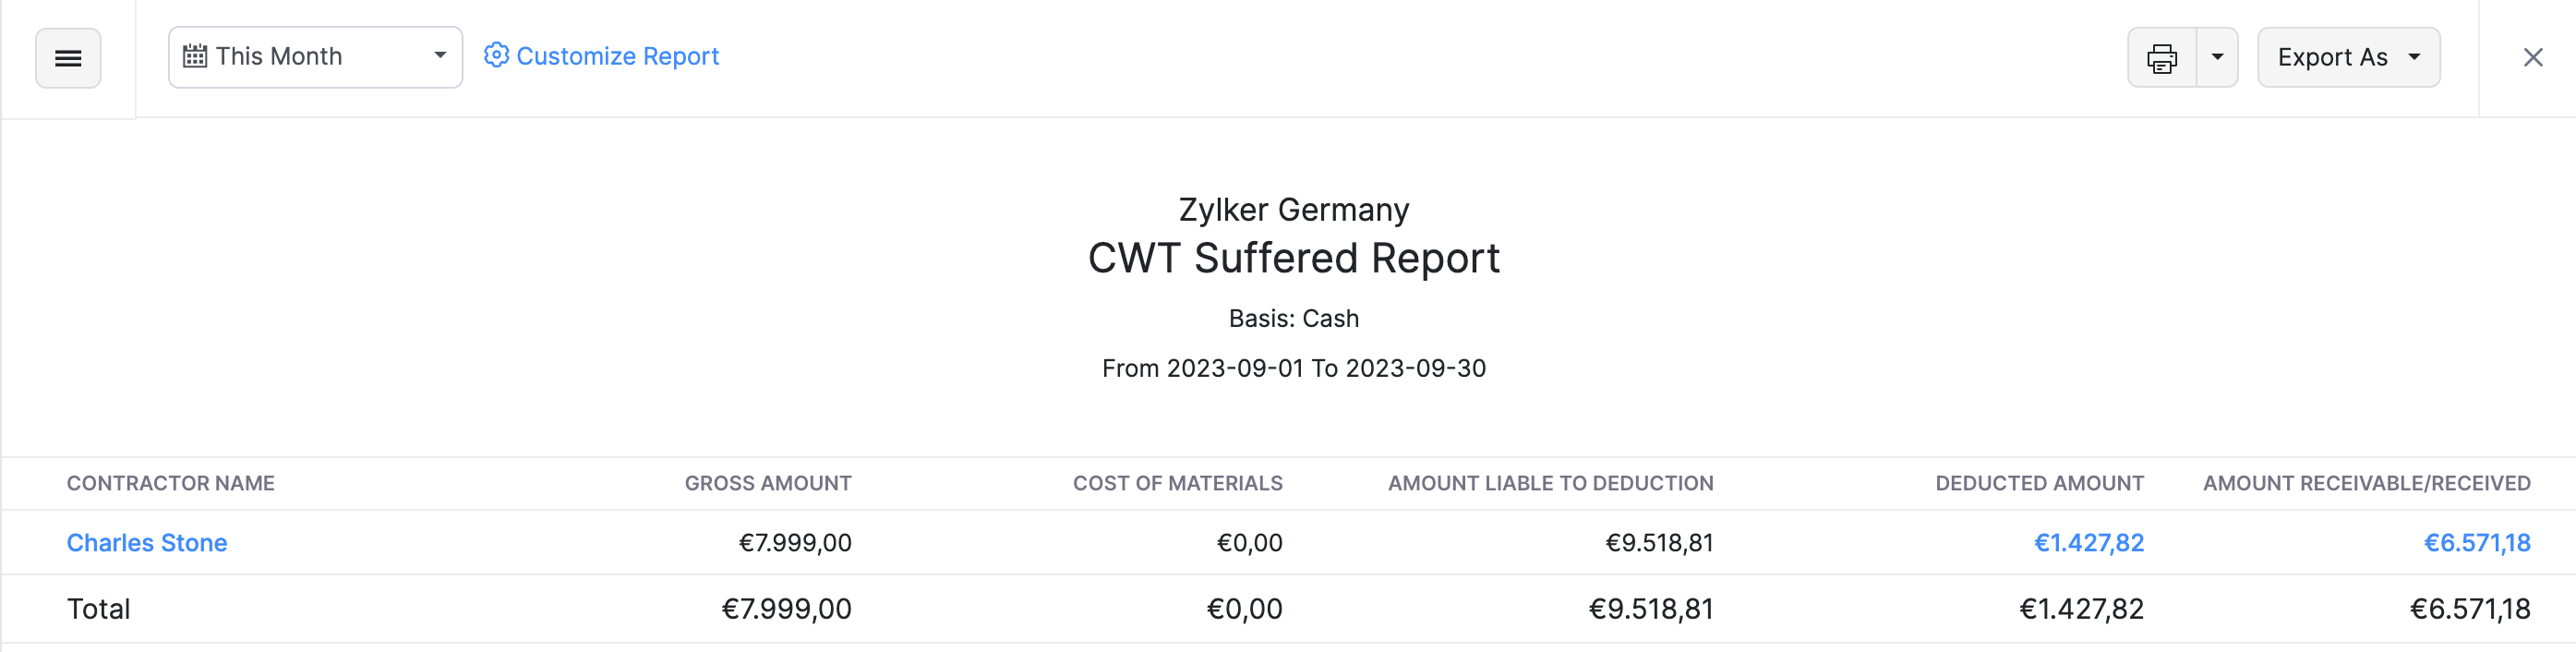 CWT Suffered Report